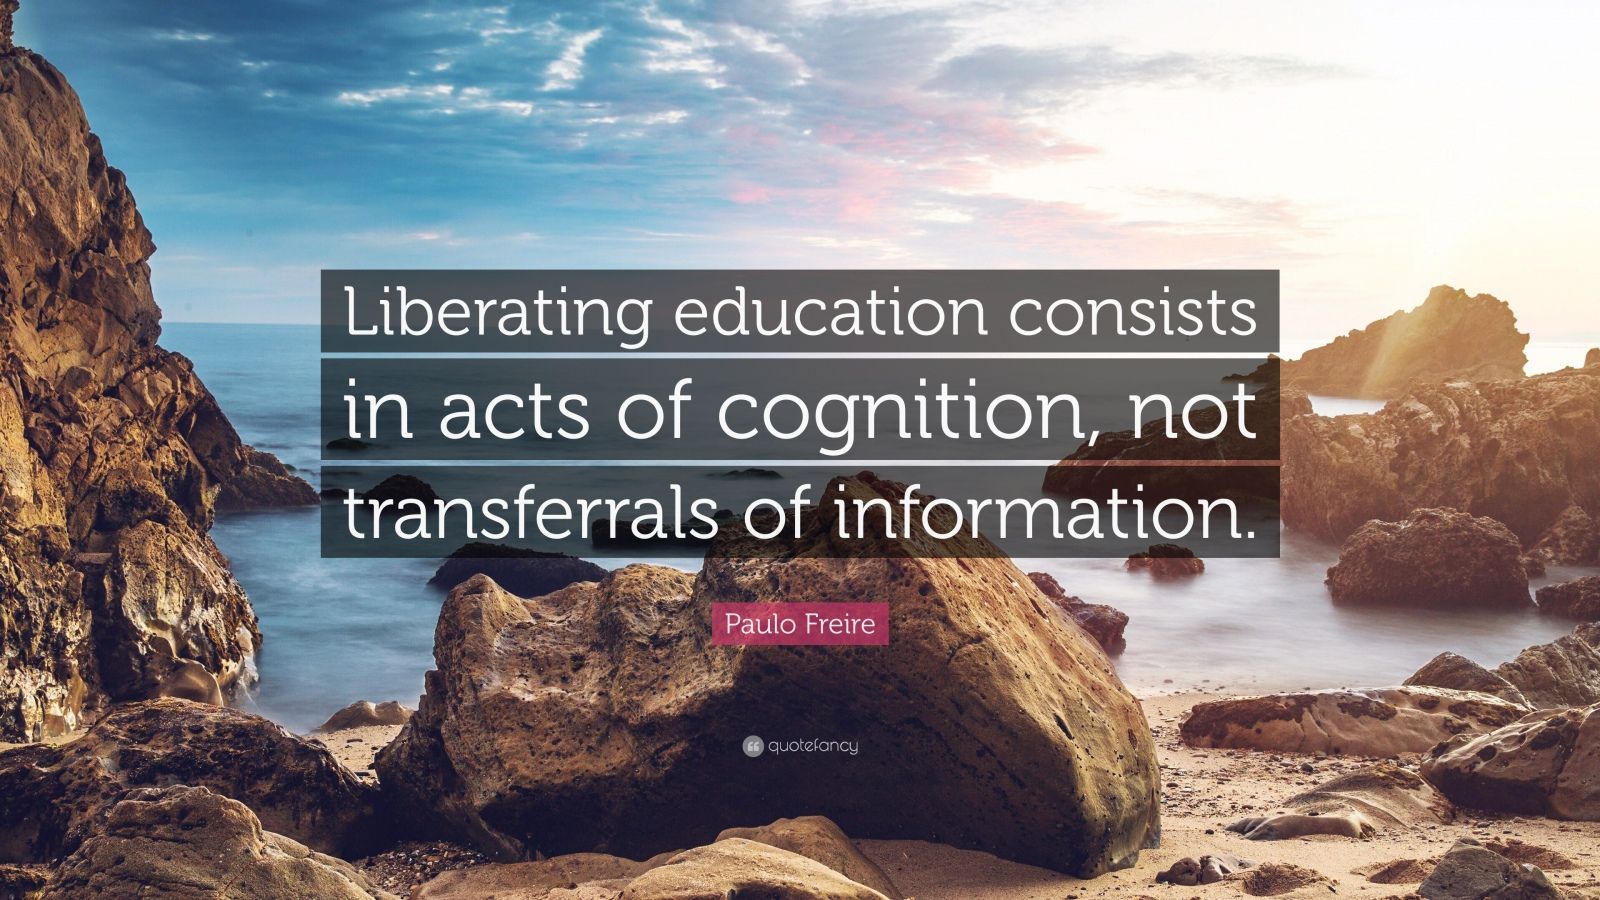 Paulo Freire Quote: “Liberating education consists in acts of cognition